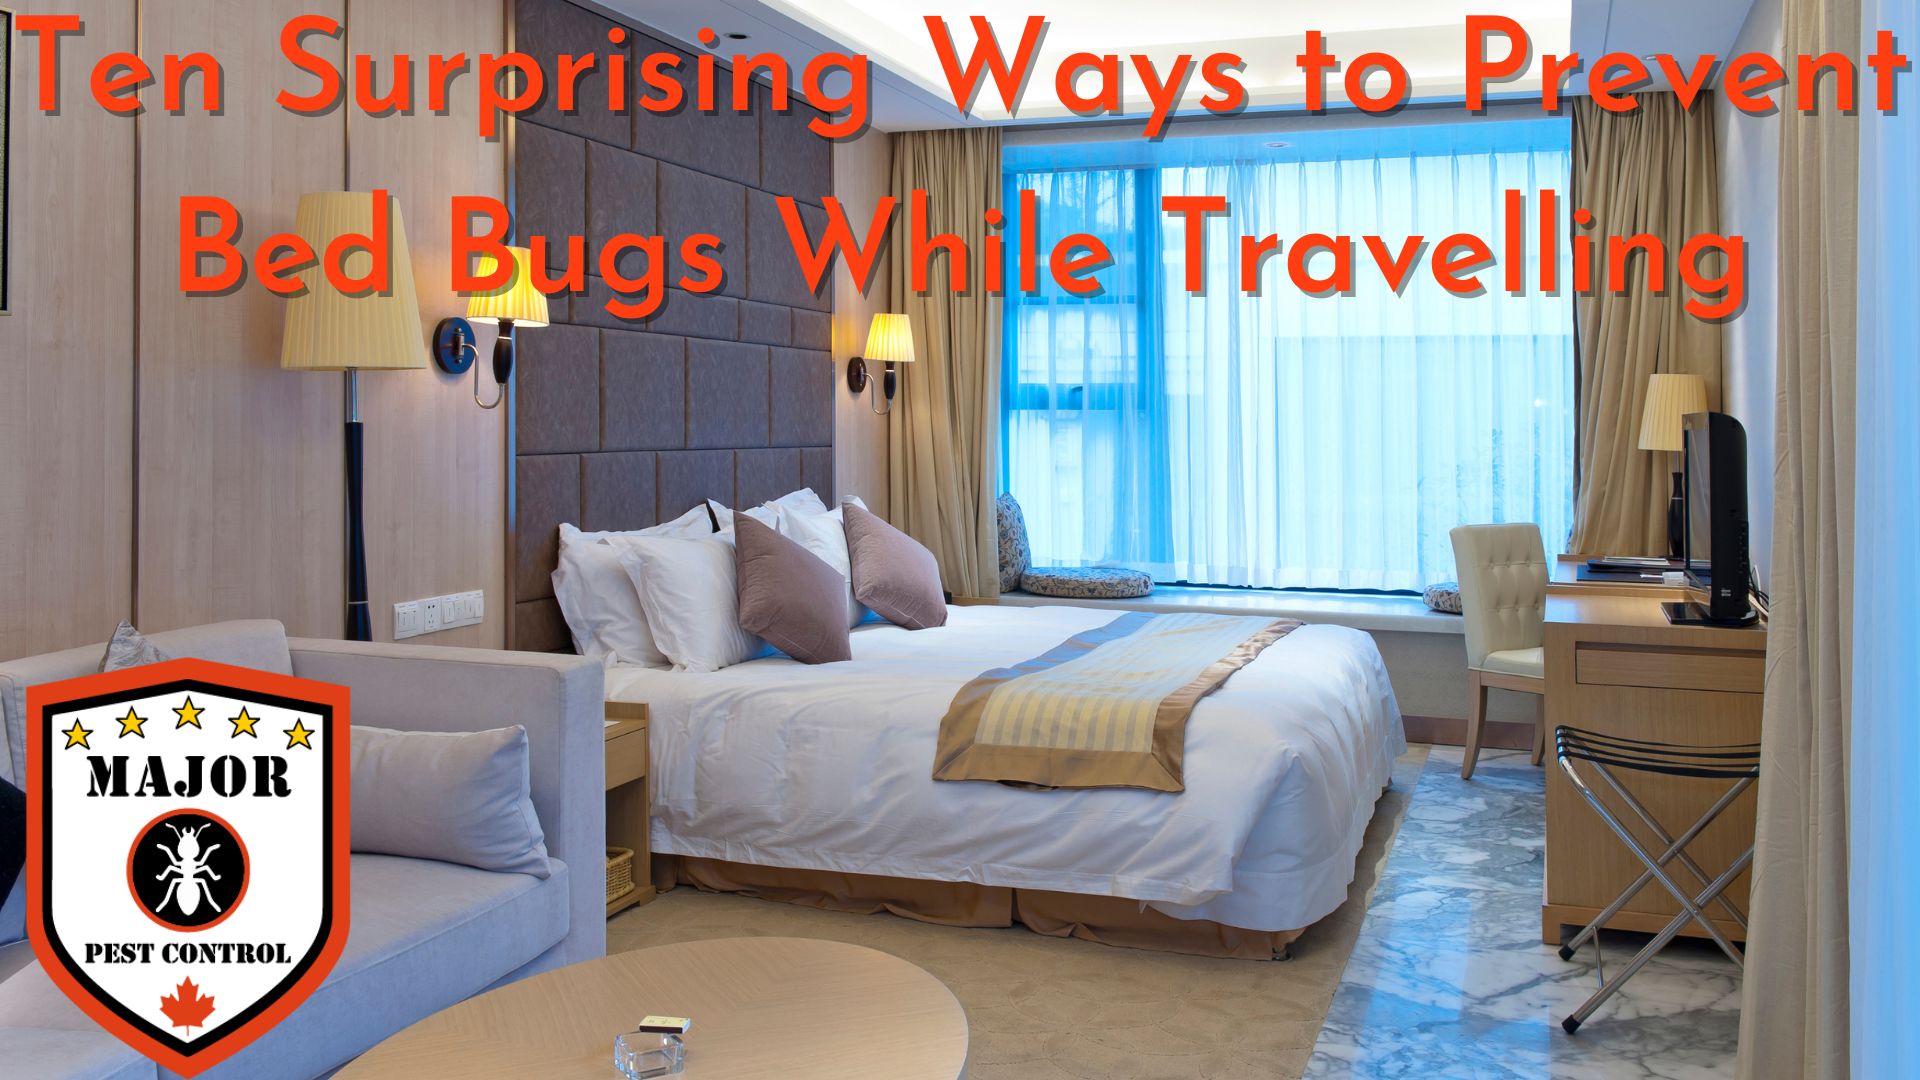 Ten Surprising Ways to Prevent Bed Bugs While Travelling by Major Pest Control